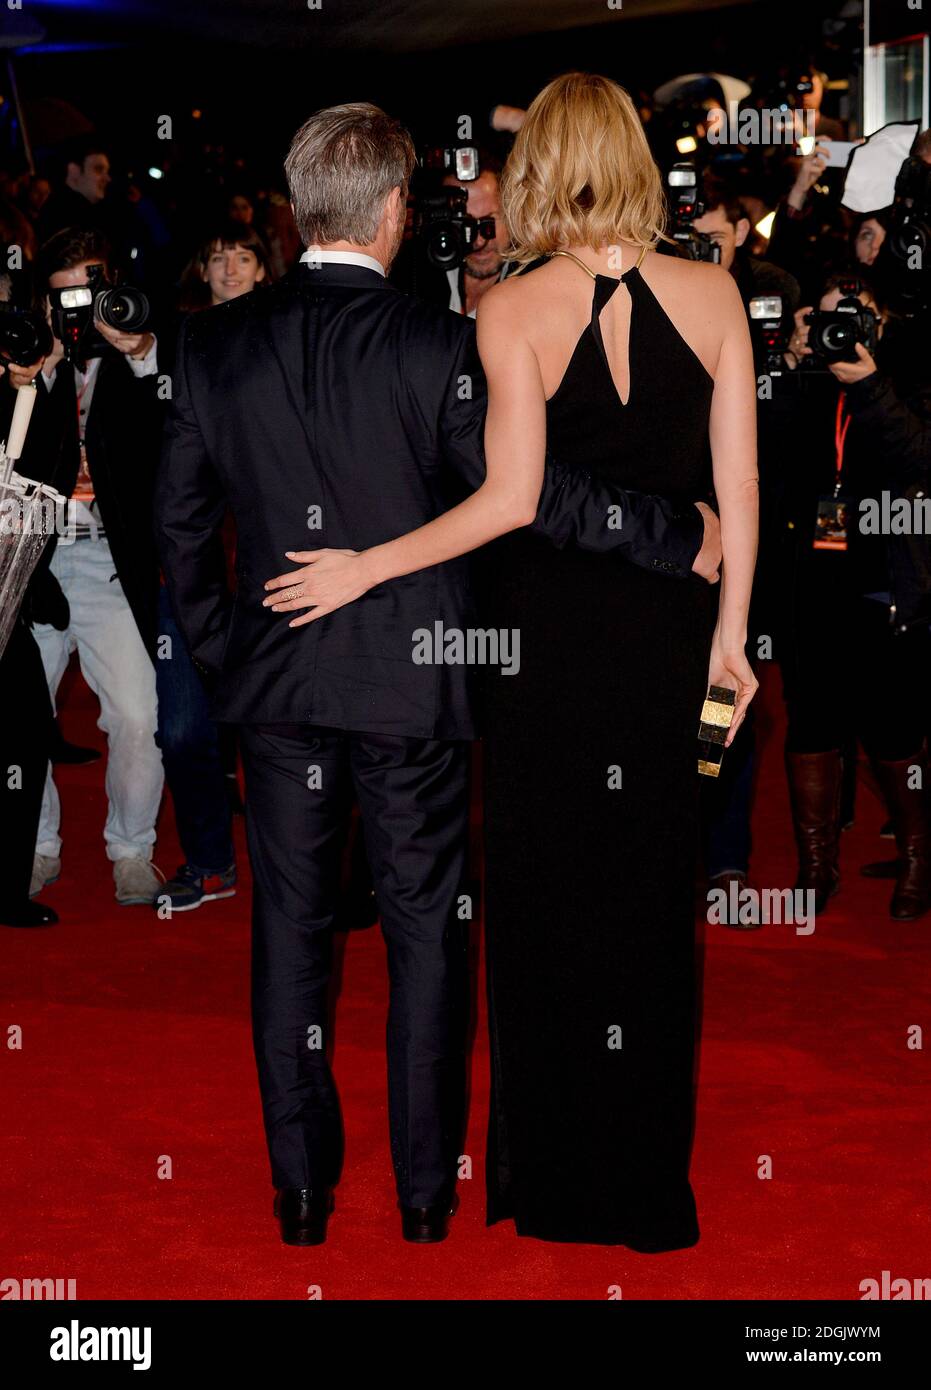 Sean Penn and Charlize Theron attending The Gunman UK film premiere held at the BFI Southbank, London Stock Photo